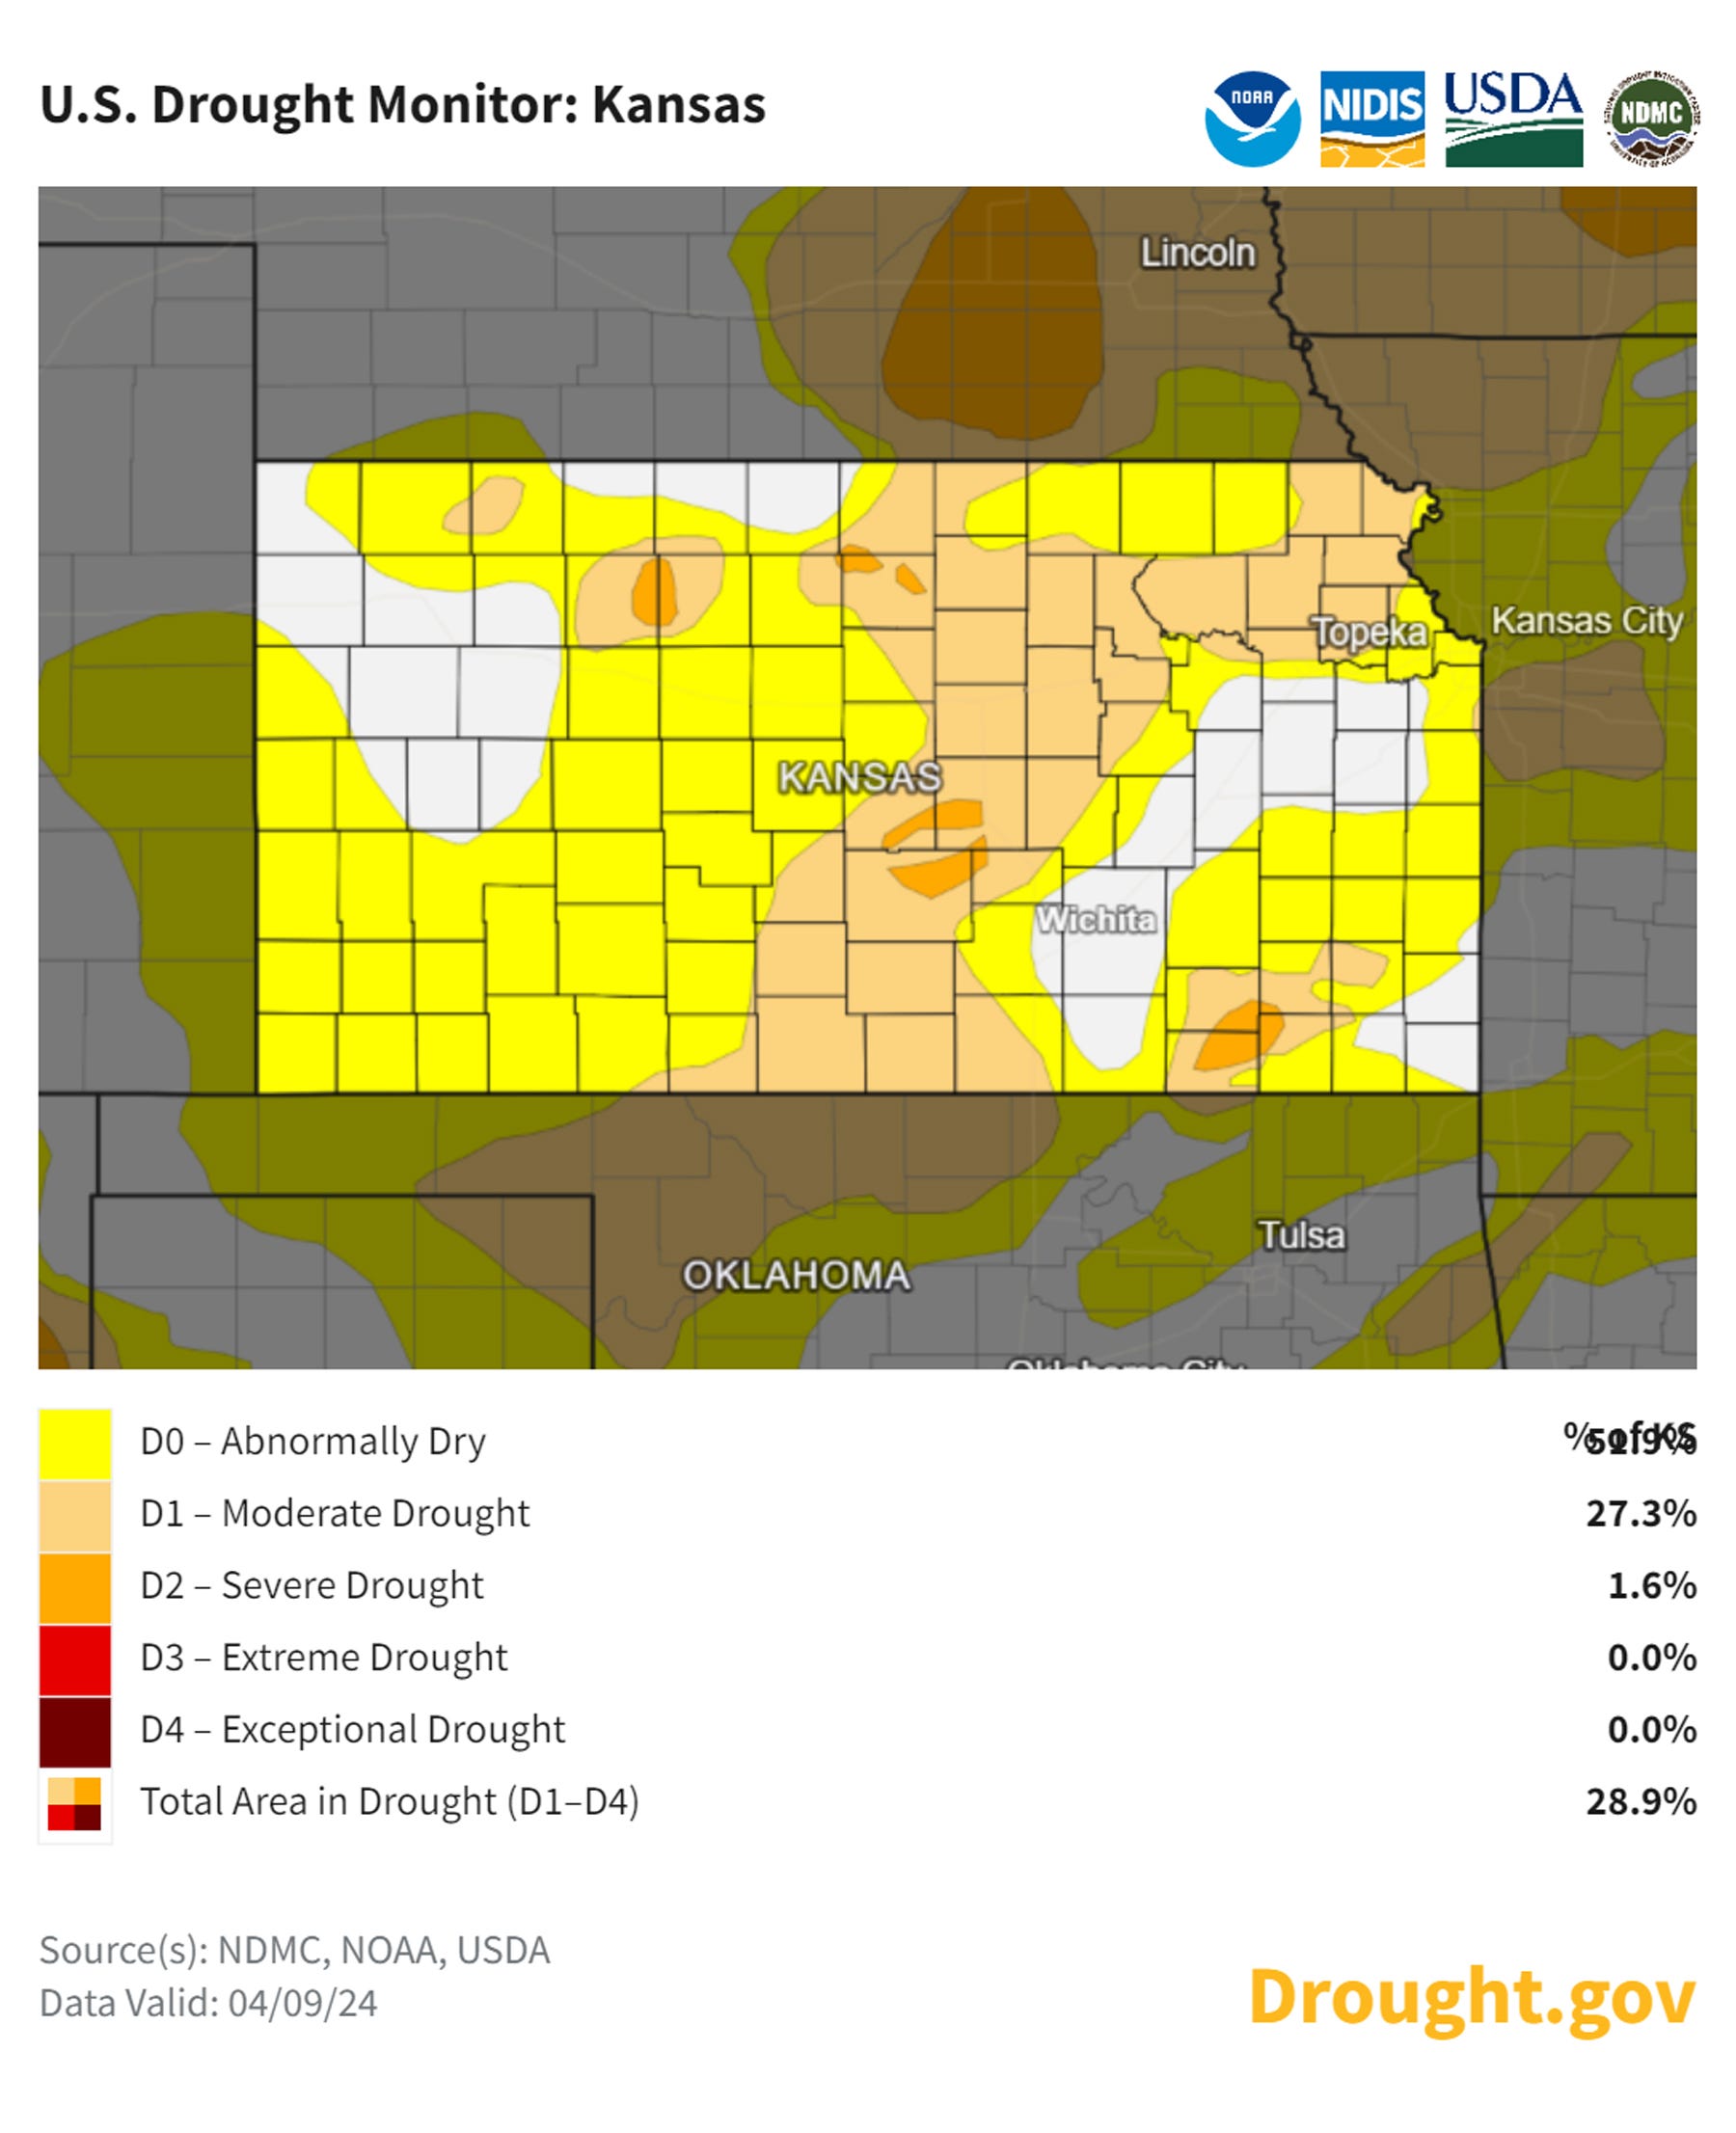 Courtesy of U.S. Drought Monitor - The U.S. Drought Monitor map for April 9 